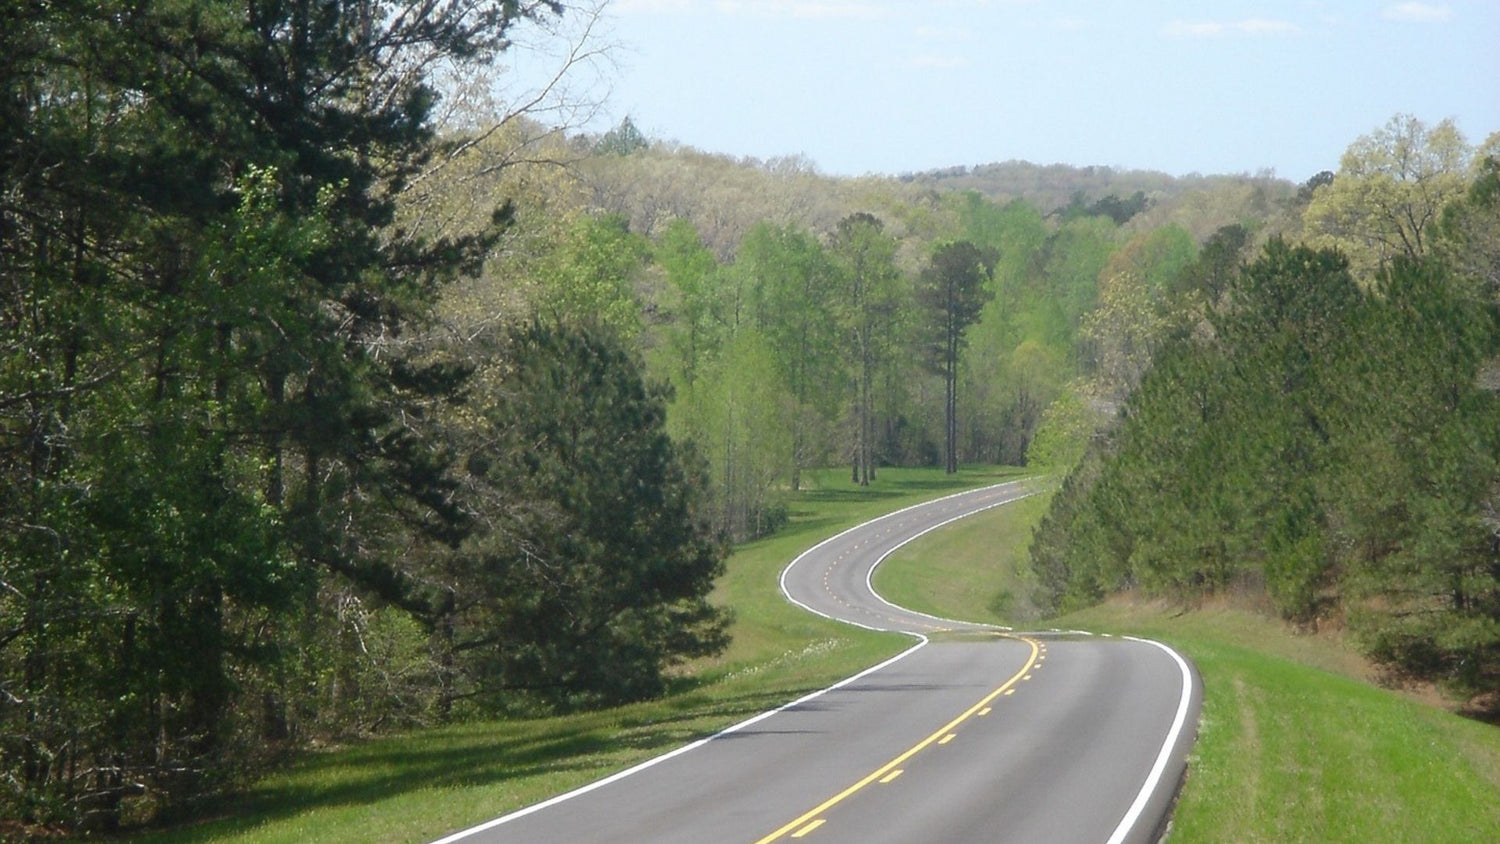 A scenic view in the Natchez Trace Parkway - History By Mail